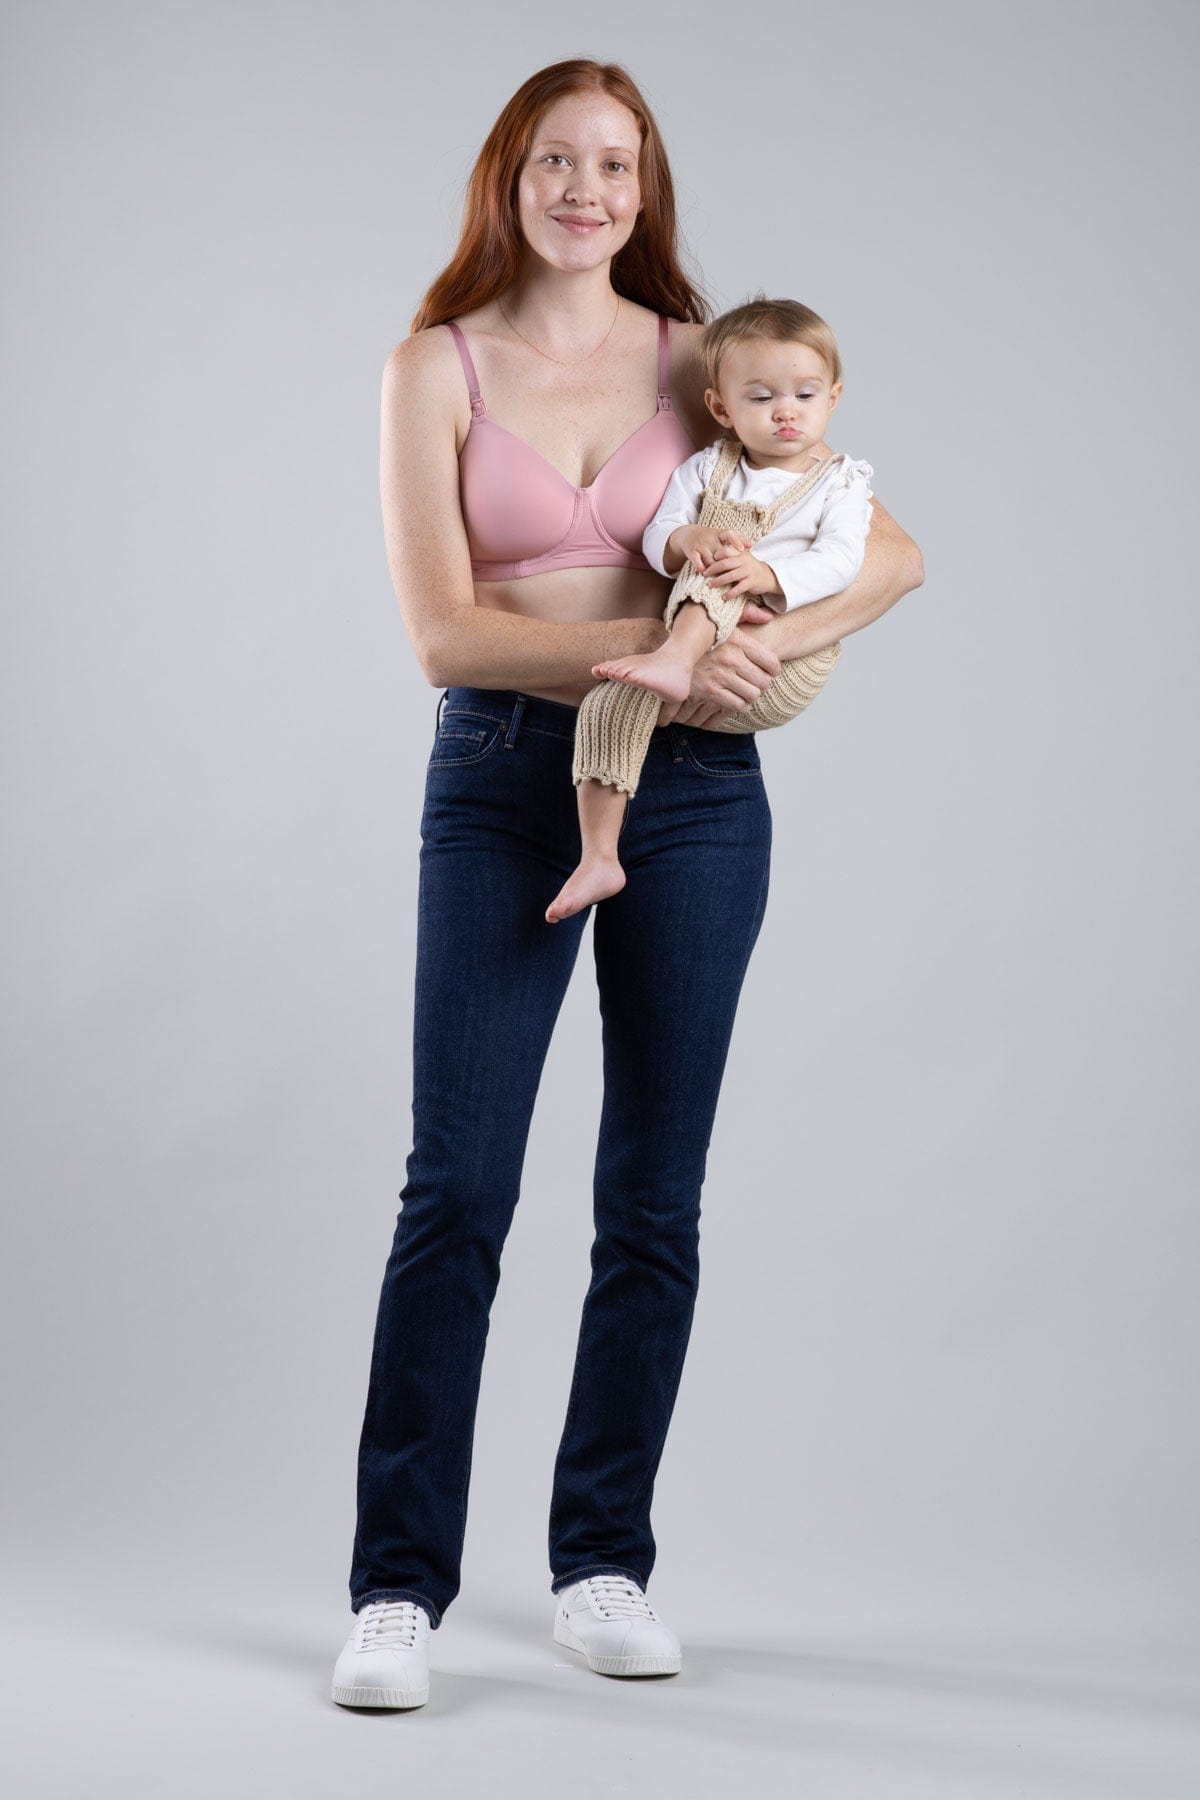 Simple Wishes Undercover nursing t-shirt bra with hide the nursing clasp feature in rose pink shown with baby held in arms